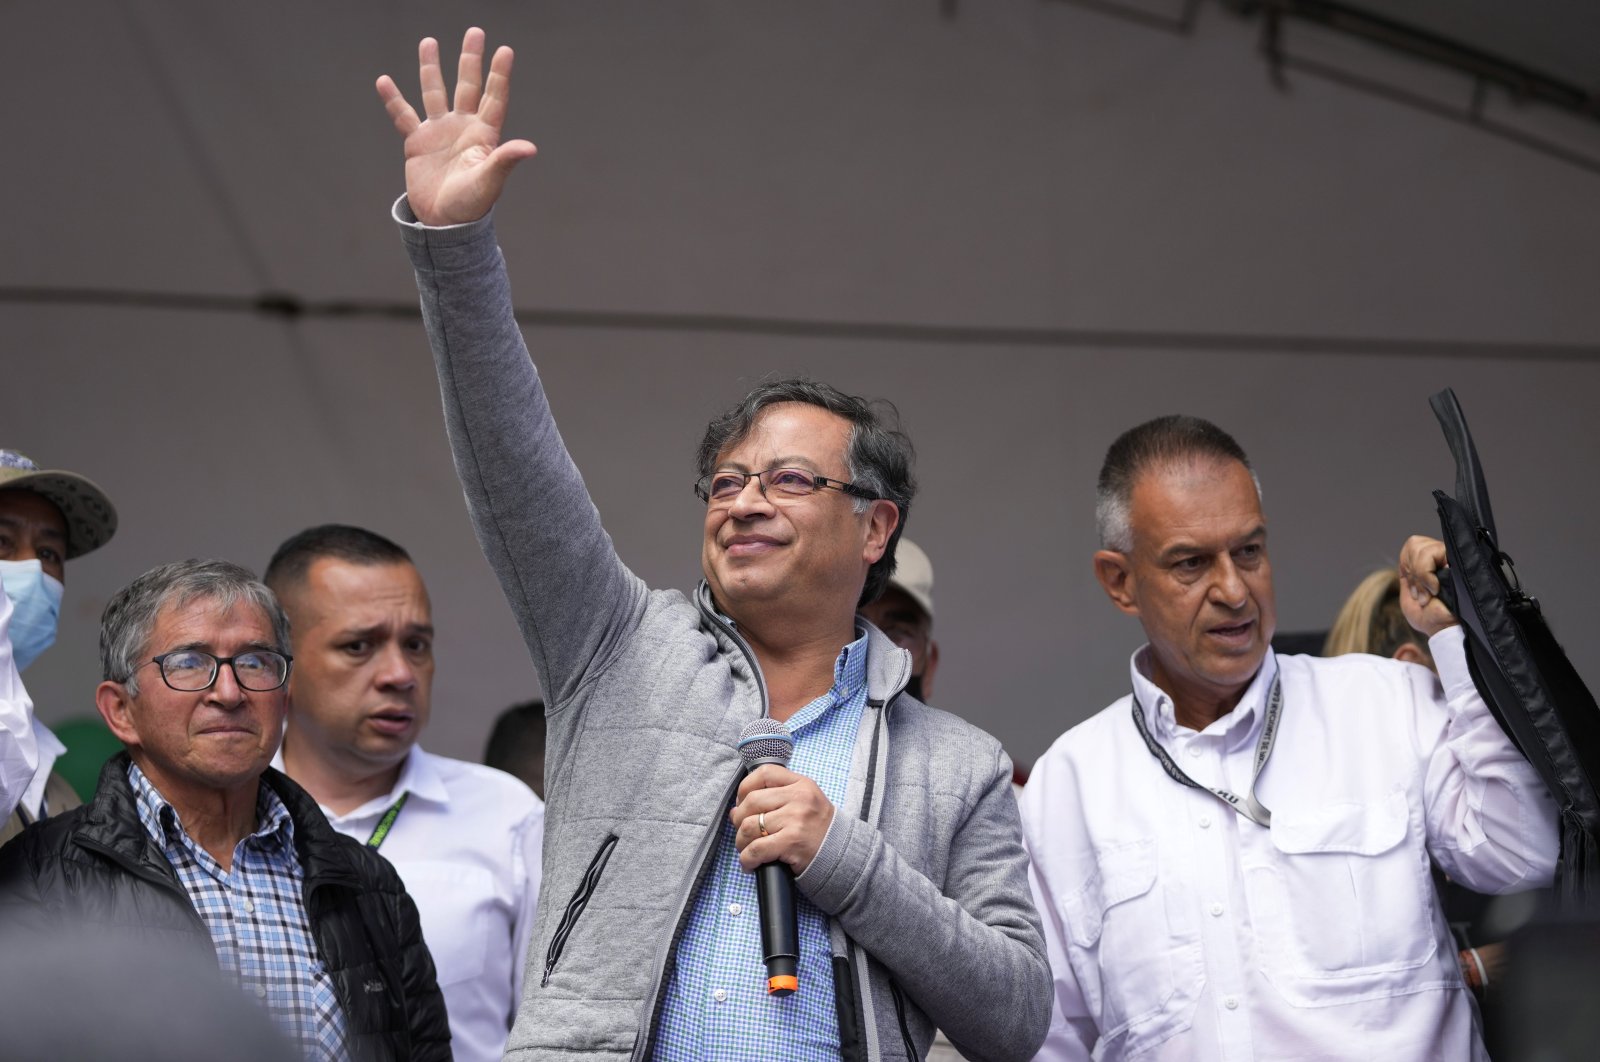 Then-Historical Pact coalition presidential candidate Gustavo Petro waves at supporters during a closing campaign rally in Zipaquira, Colombia, May 22, 2022. (AP File Photo)